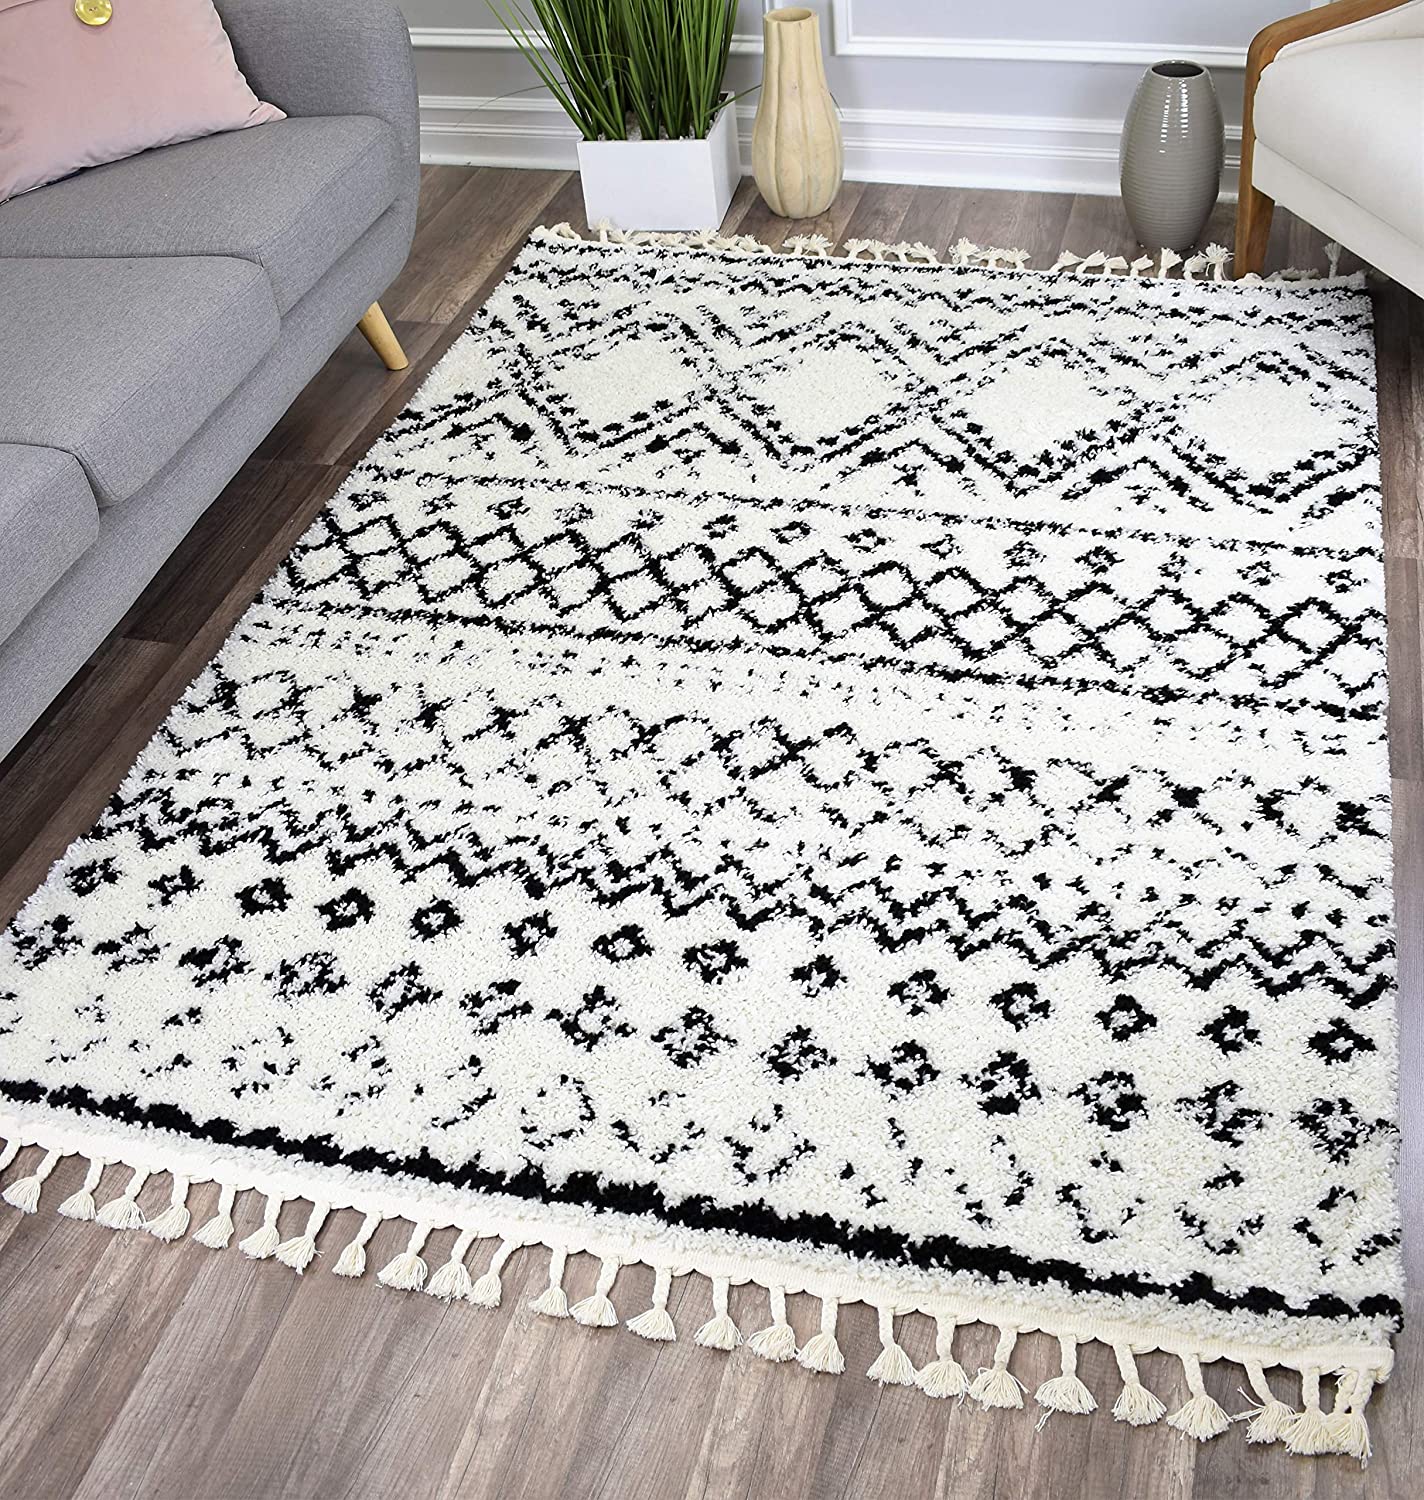 black and white fluffy area rug with geometric designs and tassels